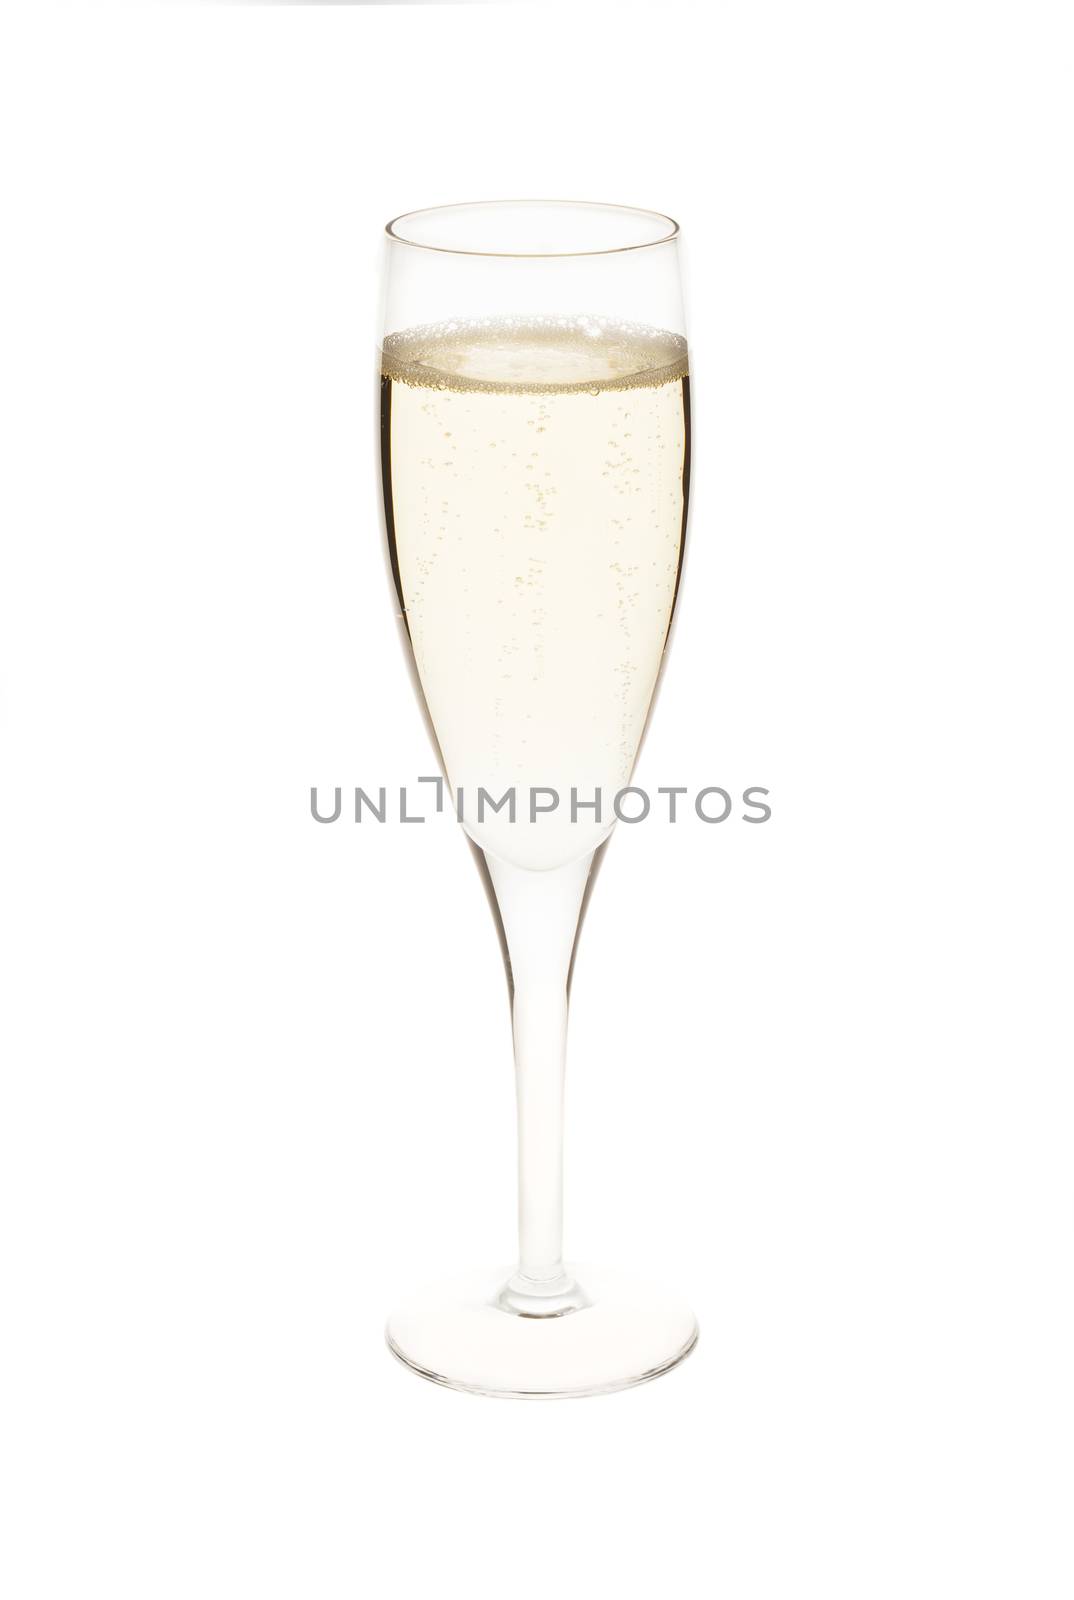 Champagne by Aarstudio